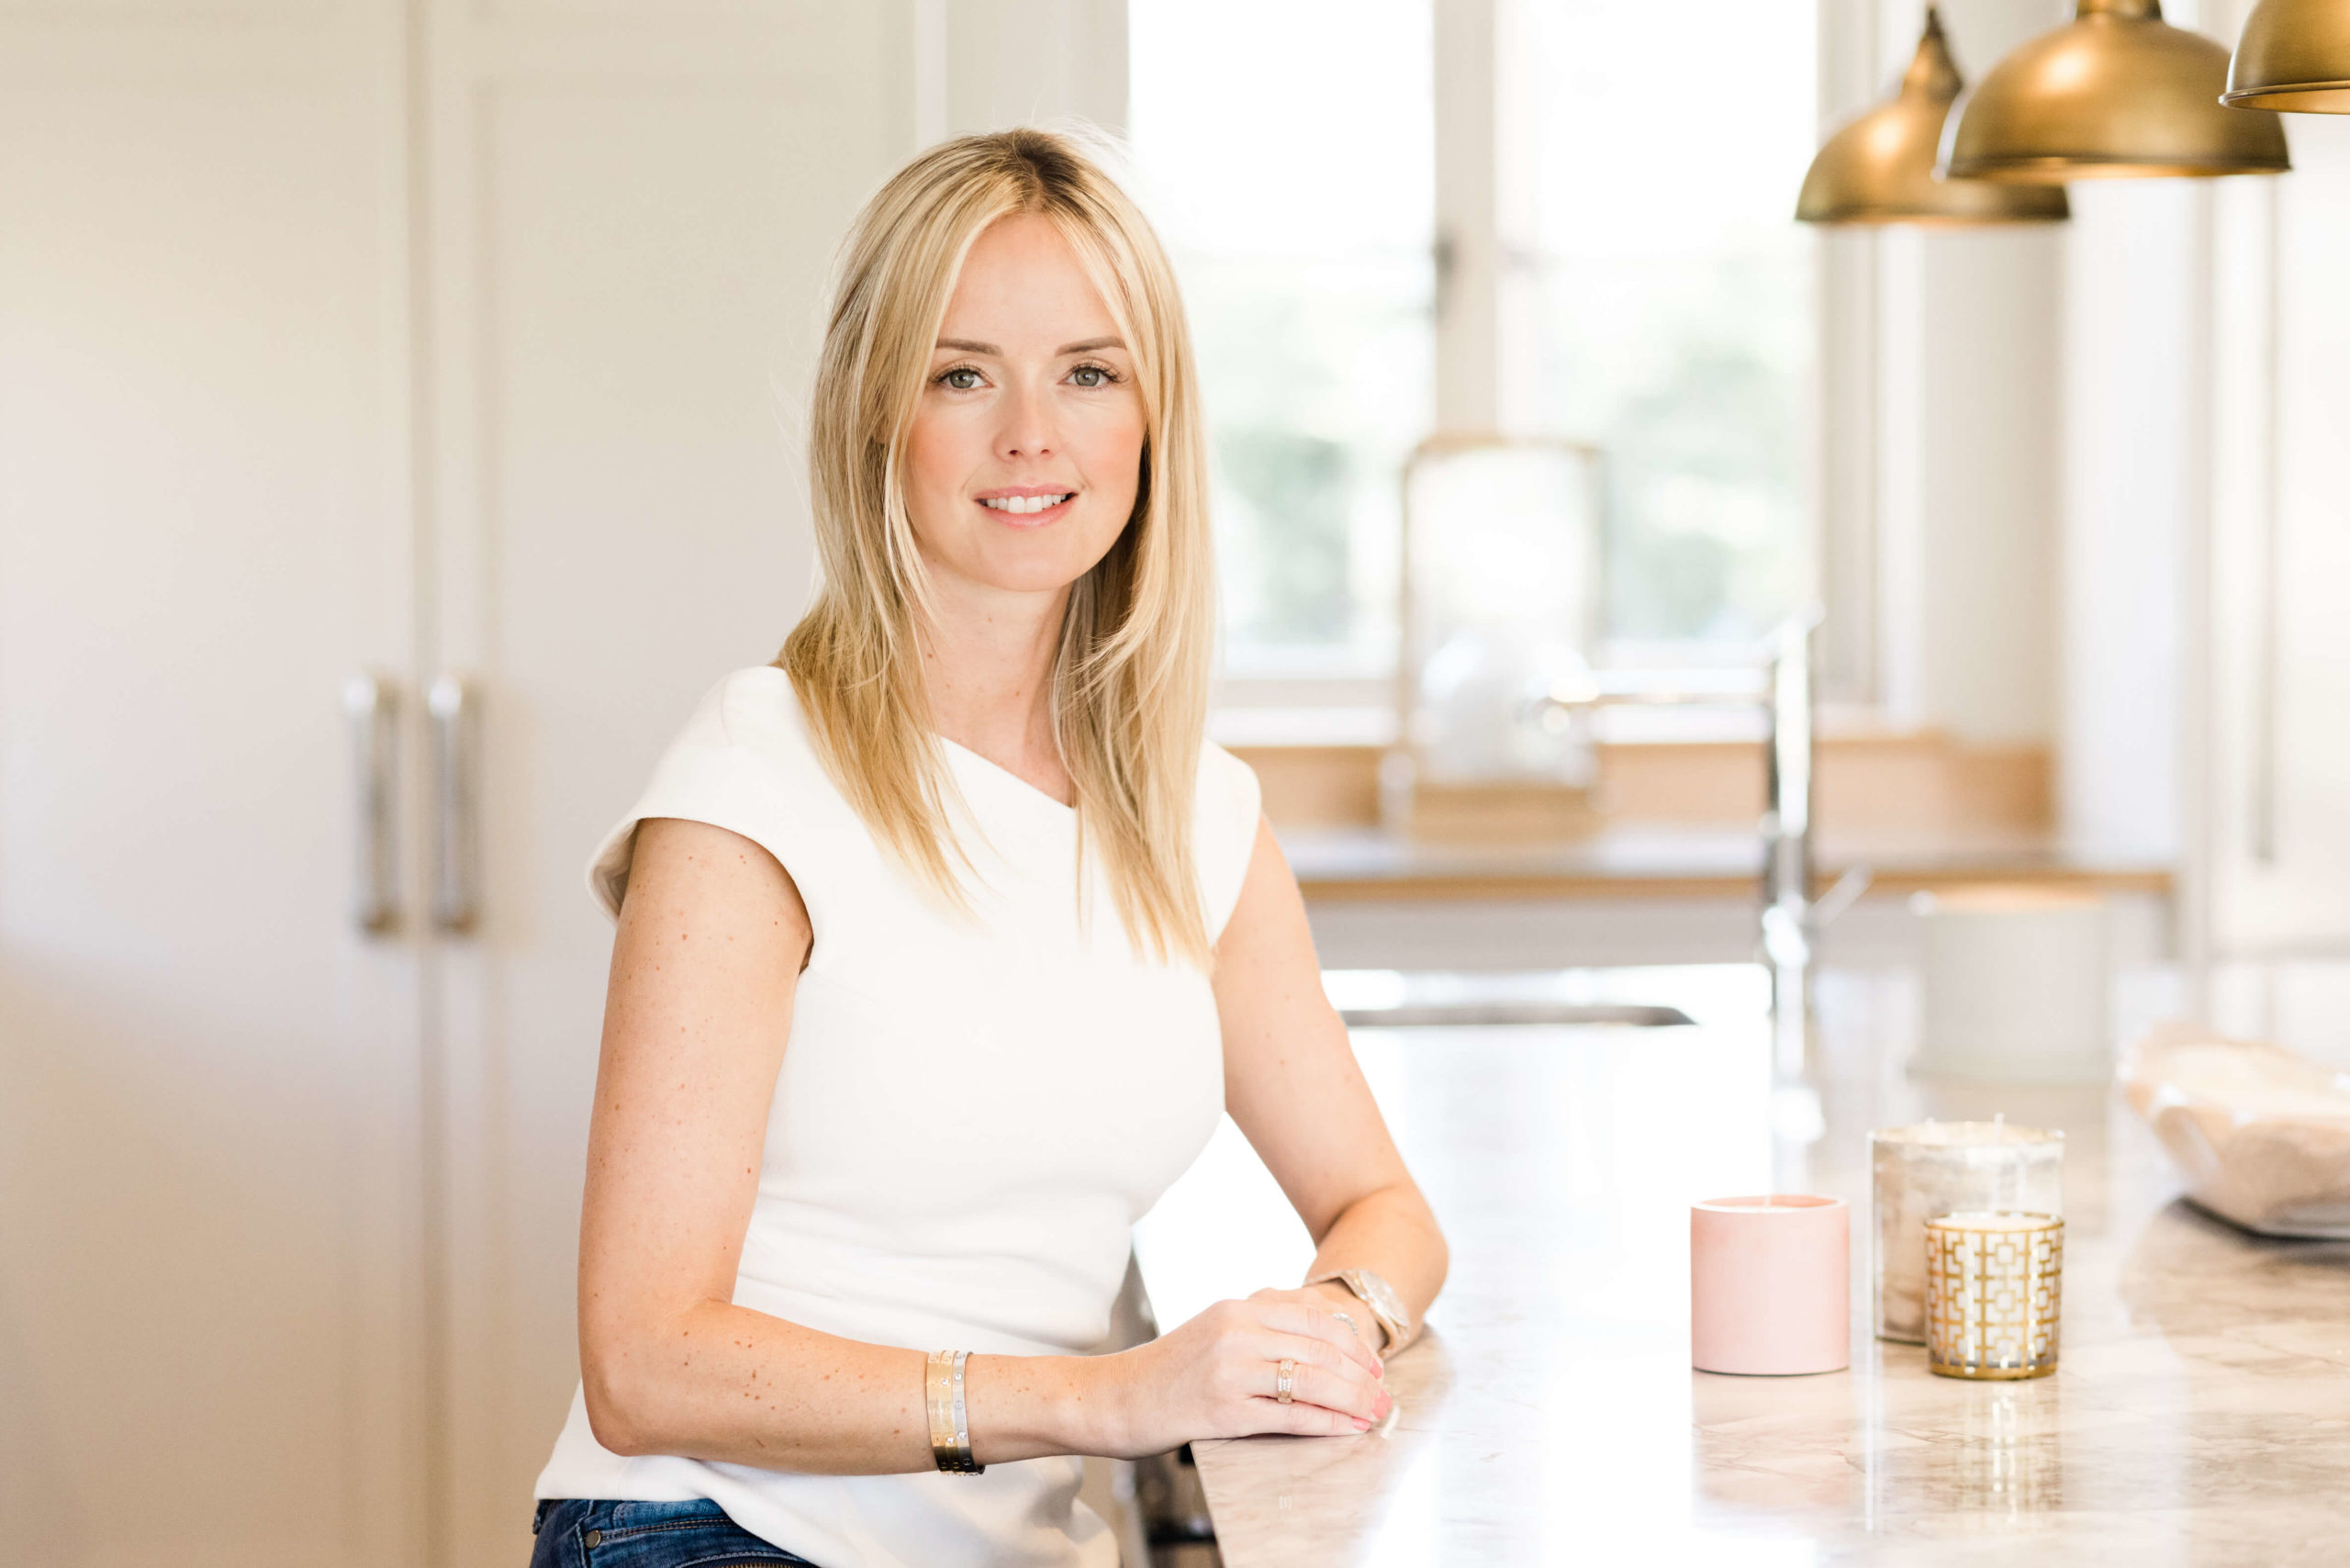 Cova London founder Leanne Holloway in her kitchen on personal branding shoot captured by Chelmsford photographer Kika mItchell photography